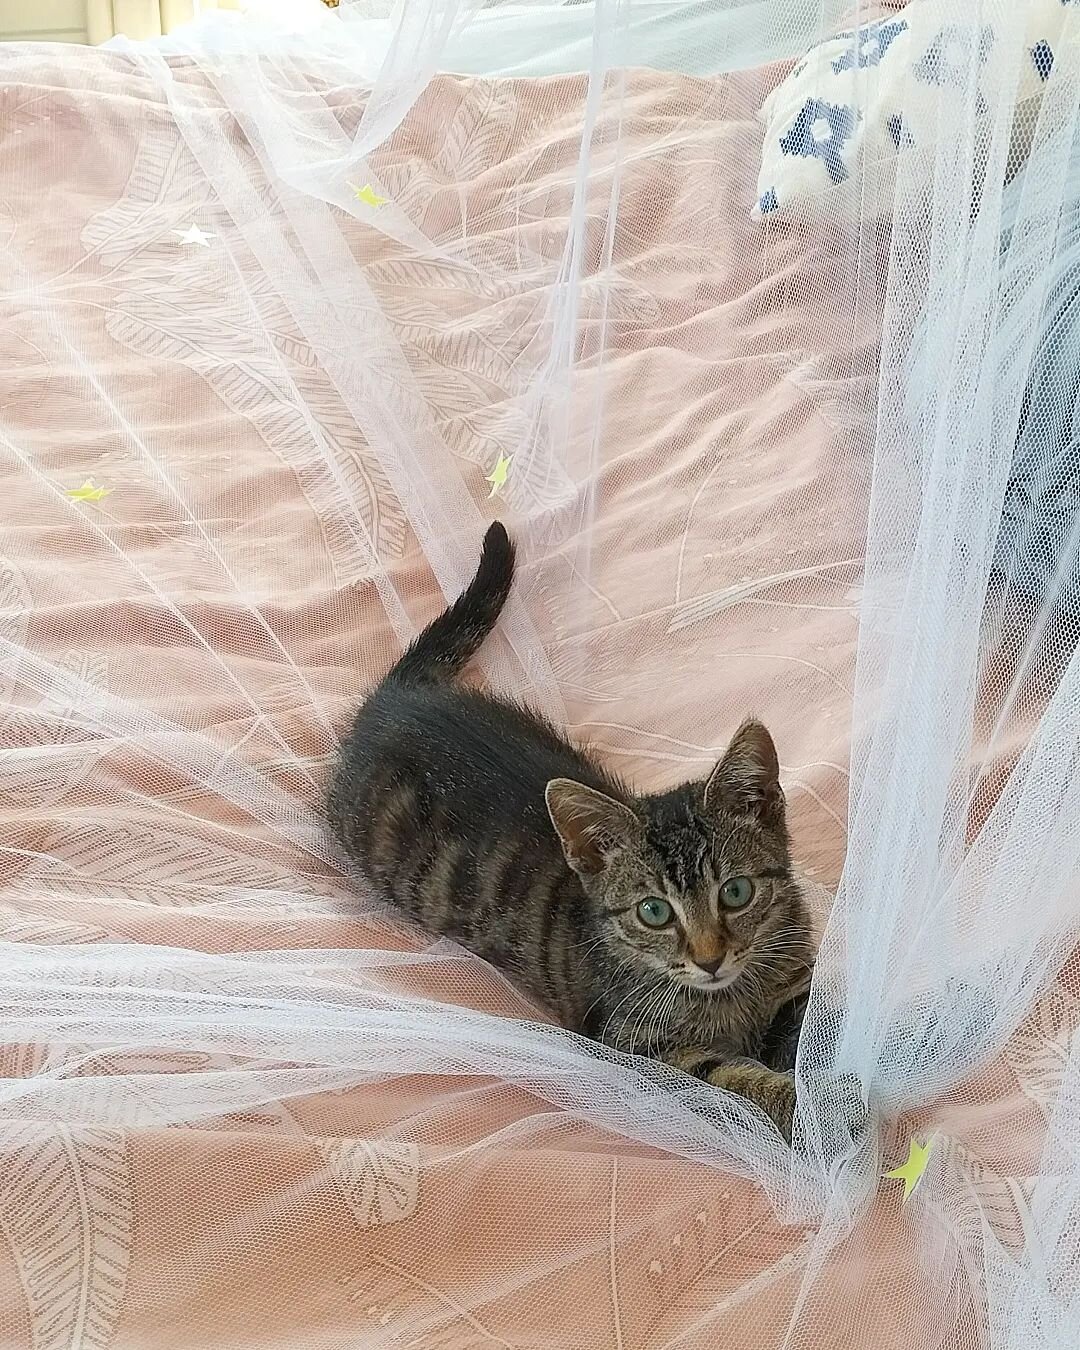 Pippin testing whether my mosquito net also keeps out cats. Spoiler alert: it doesn't. 🐱

#pippinthebold #catsofinstagram #cats #kitty #cat #fosterkitten #adoptdontshop #feline #catsofig #catlover #catlady #crazycatlady #lovecats #catsnotkids #home 